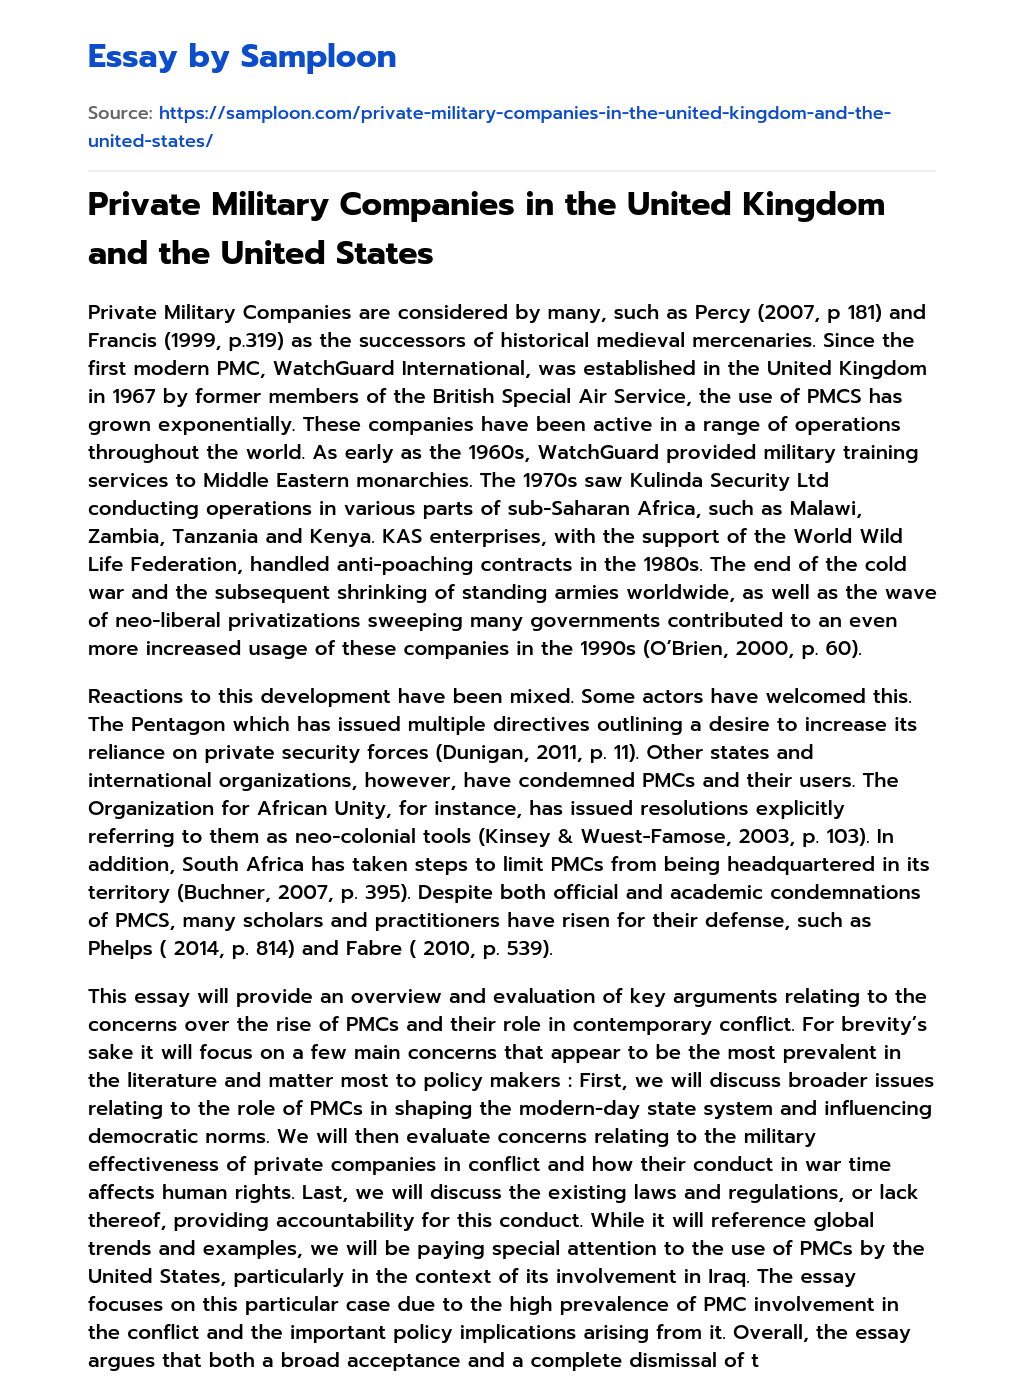 Private Military Companies in the United Kingdom and the United States essay